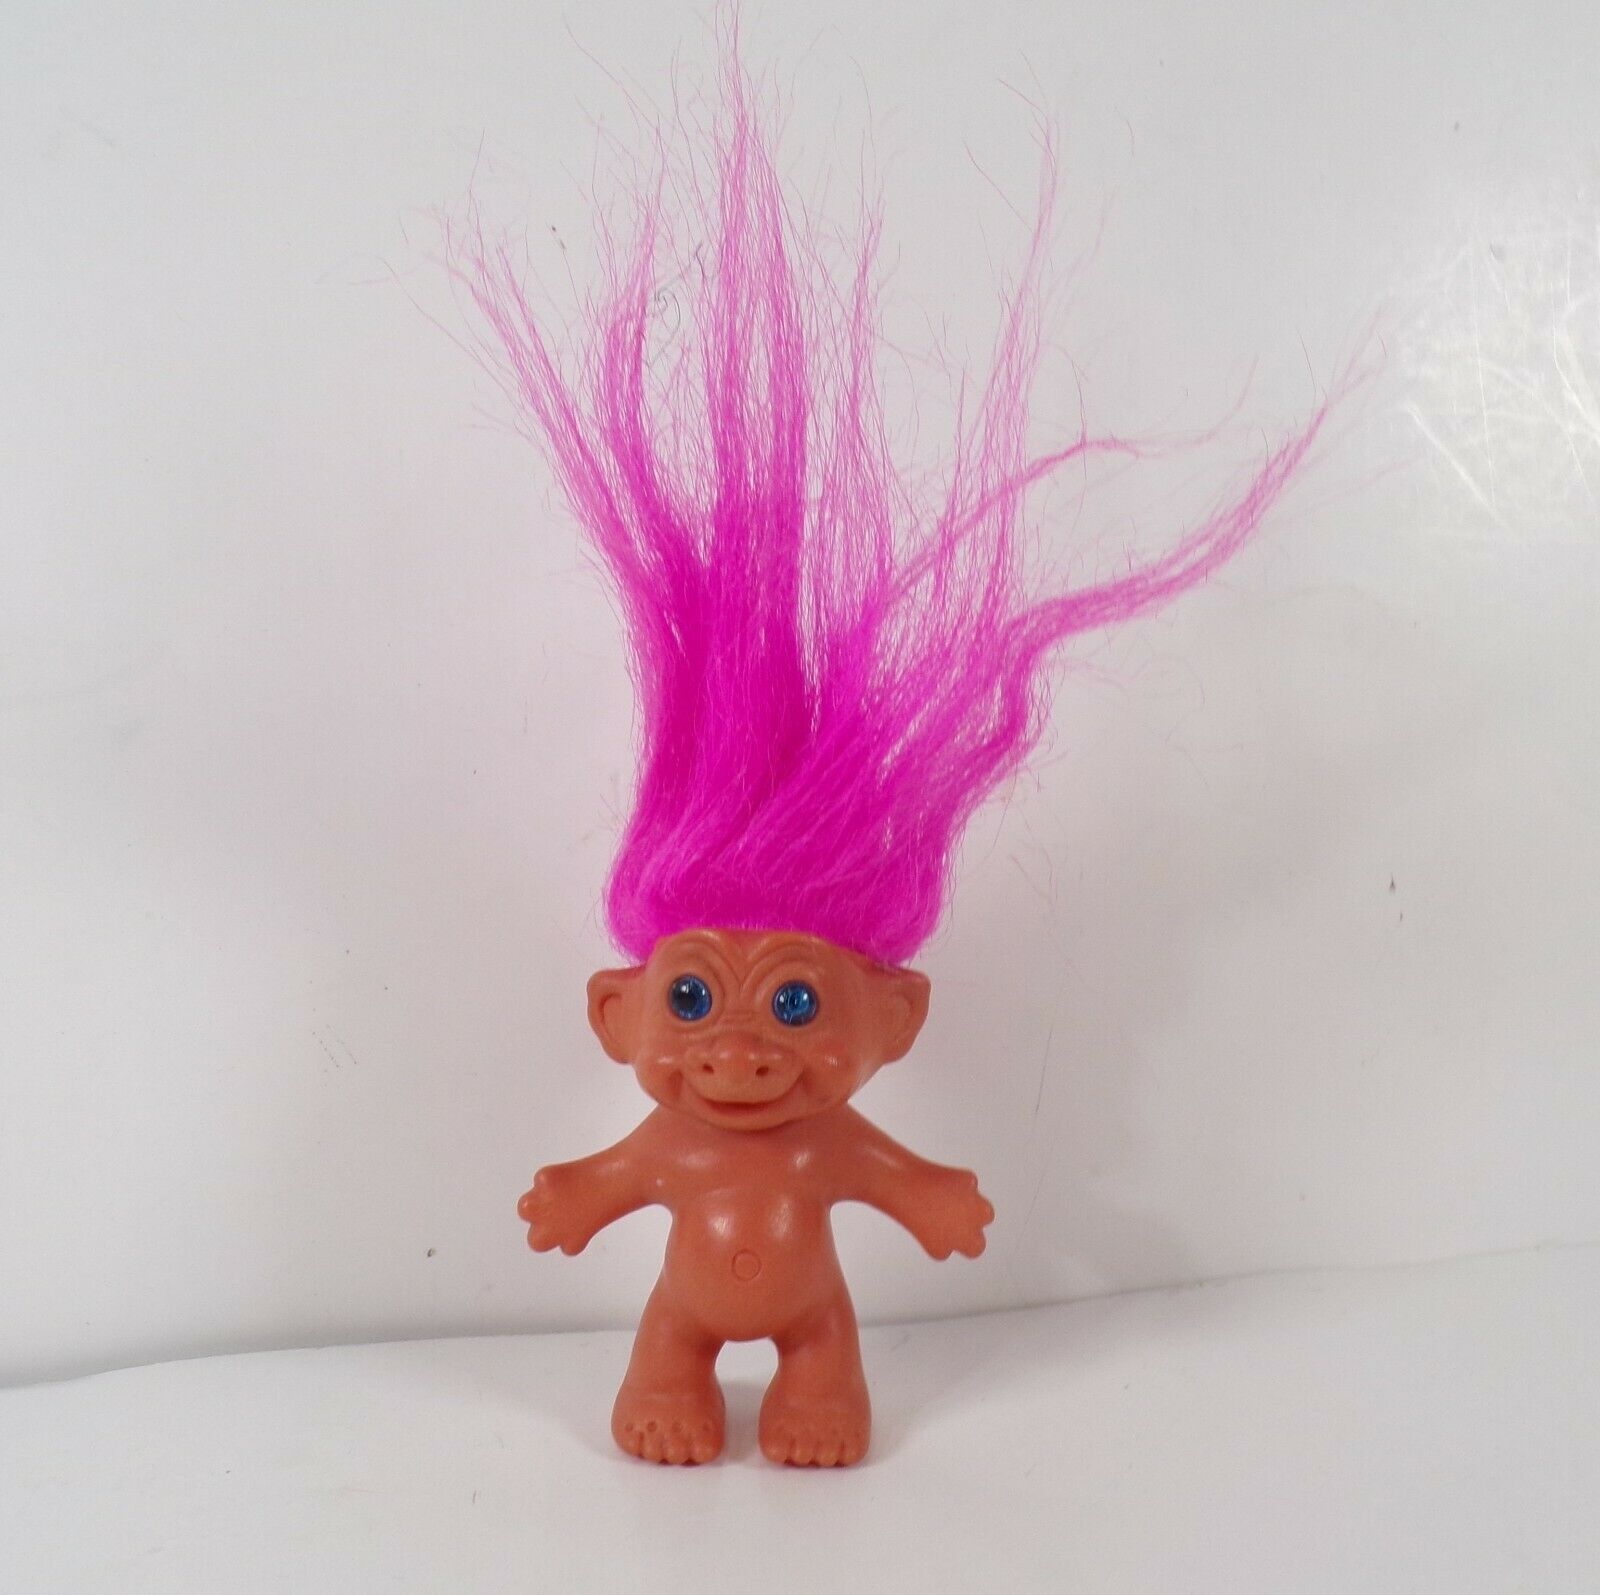 Primary image for Unbranded 2.5" Small Troll Doll with Blue Eyes and Pink Hair